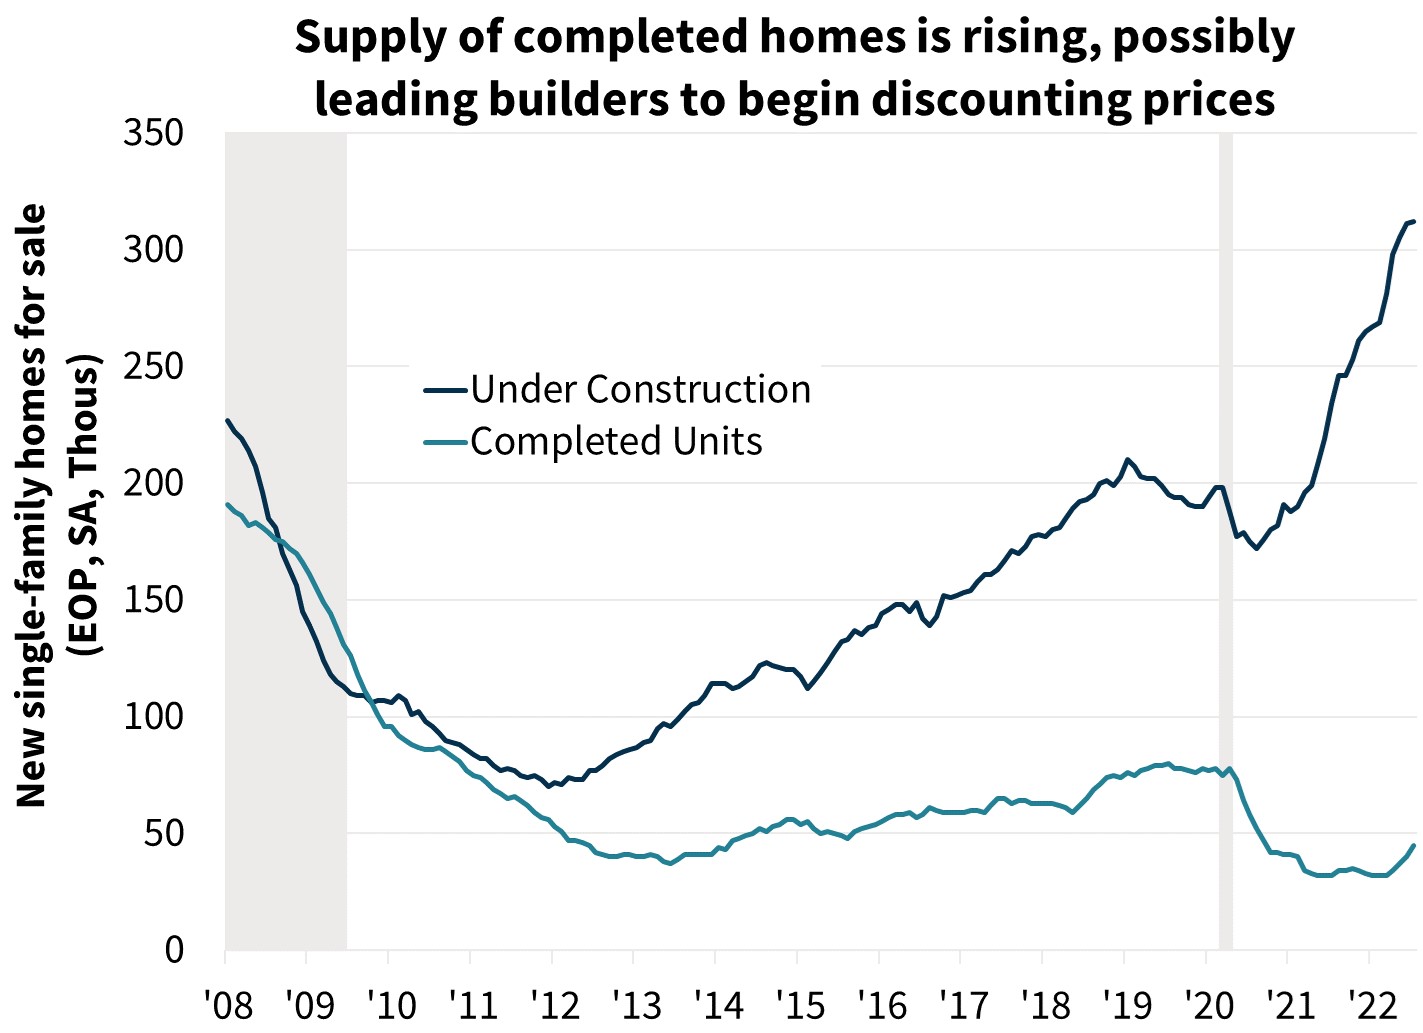  Supply of completed homes is rising, possibly leading builders to begin discounting prices 